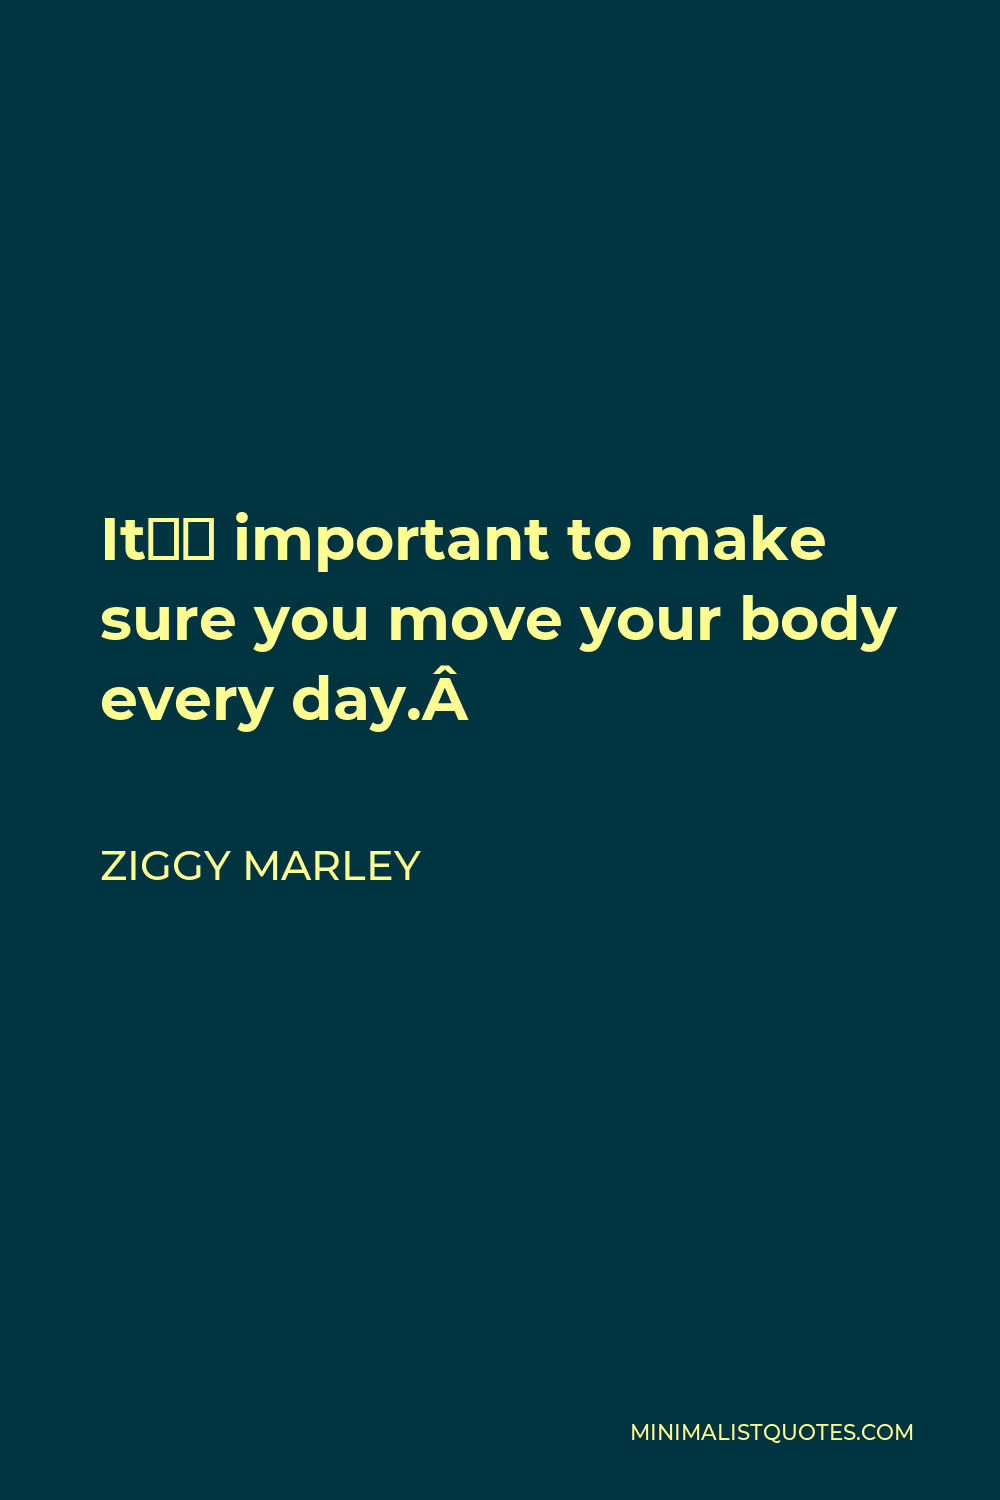 Ziggy Marley Quote - It’s important to make sure you move your body every day. 